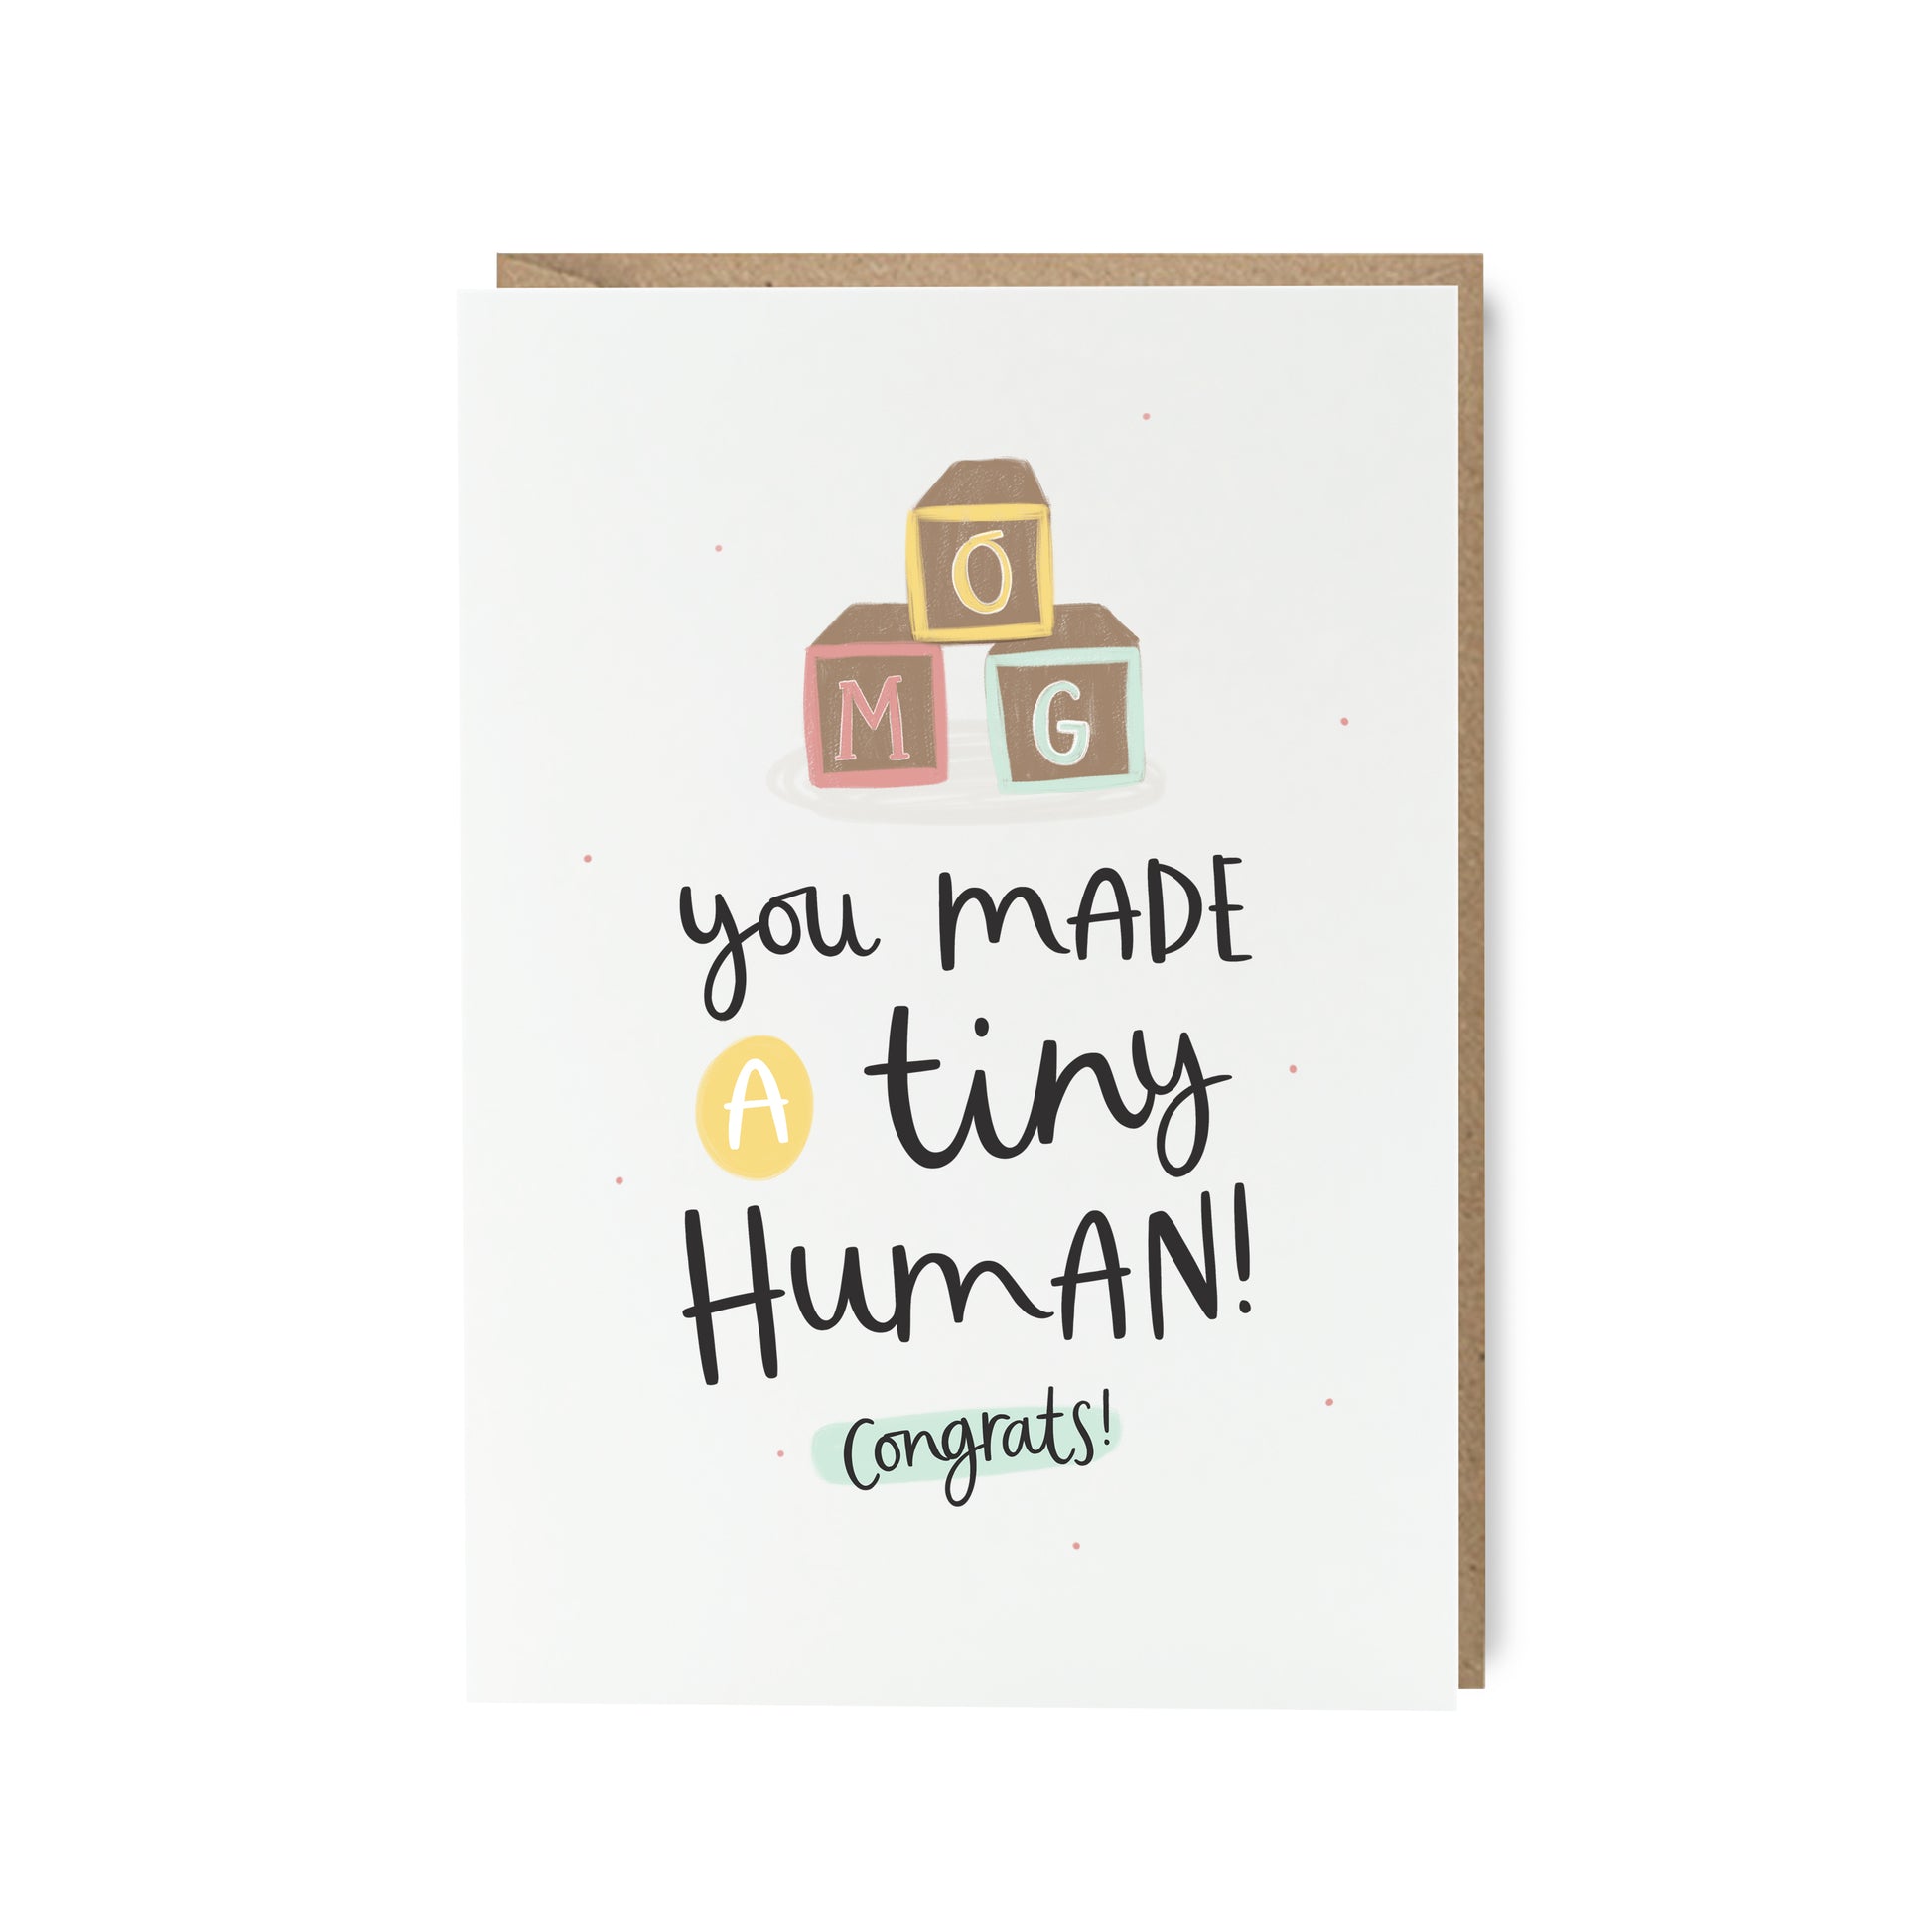 OMG you made a tiny human funny new baby card by abbie imagine